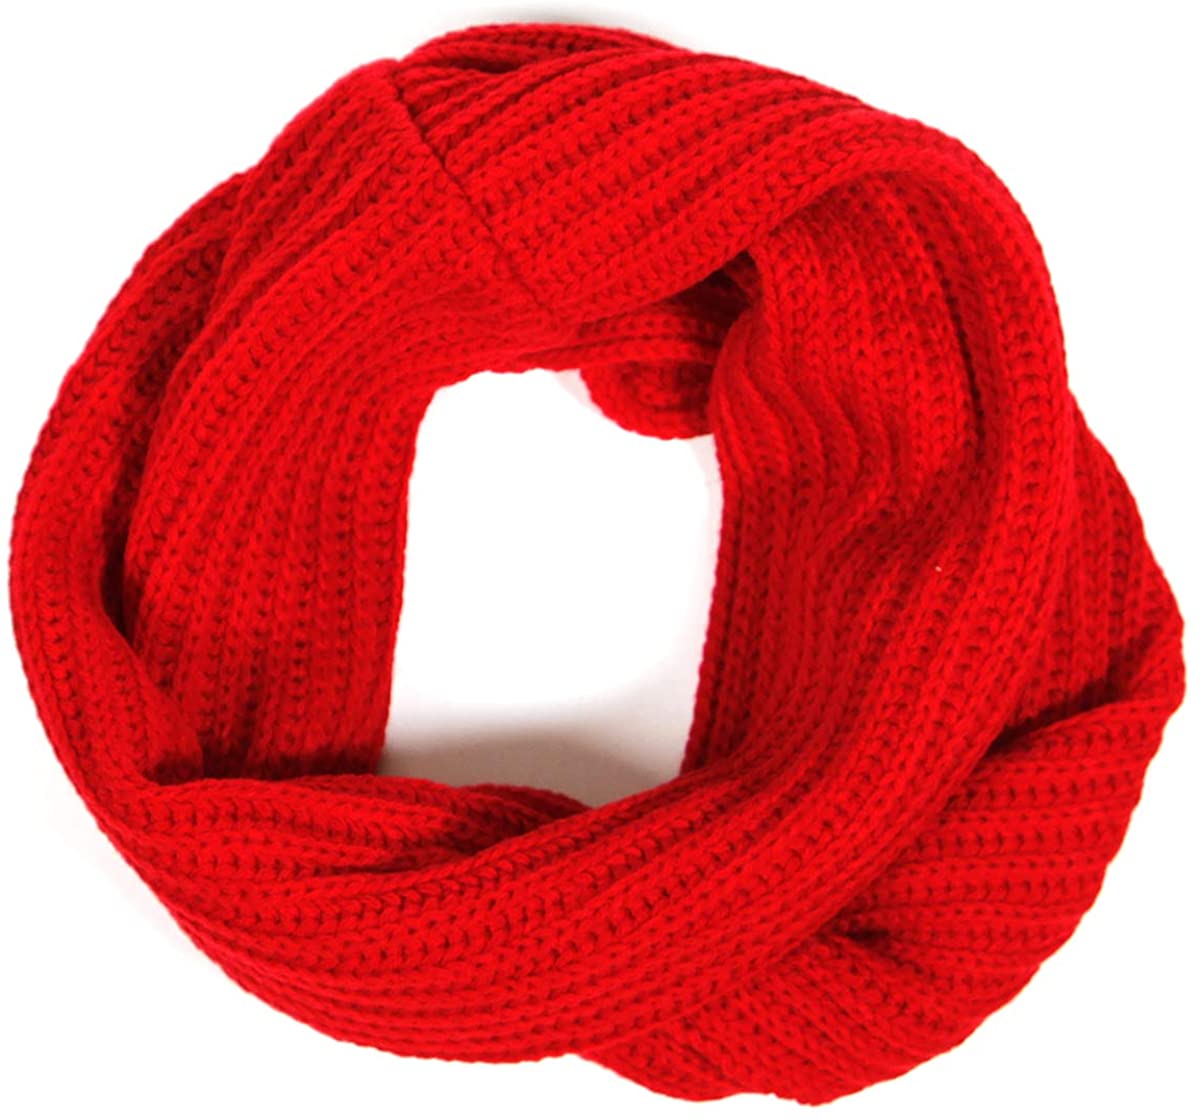 Knit Infinity Scarves for Women Thick Winter Scarf Warm Cable Knit Red Black Infinity Scarf Circle Loop Scarf